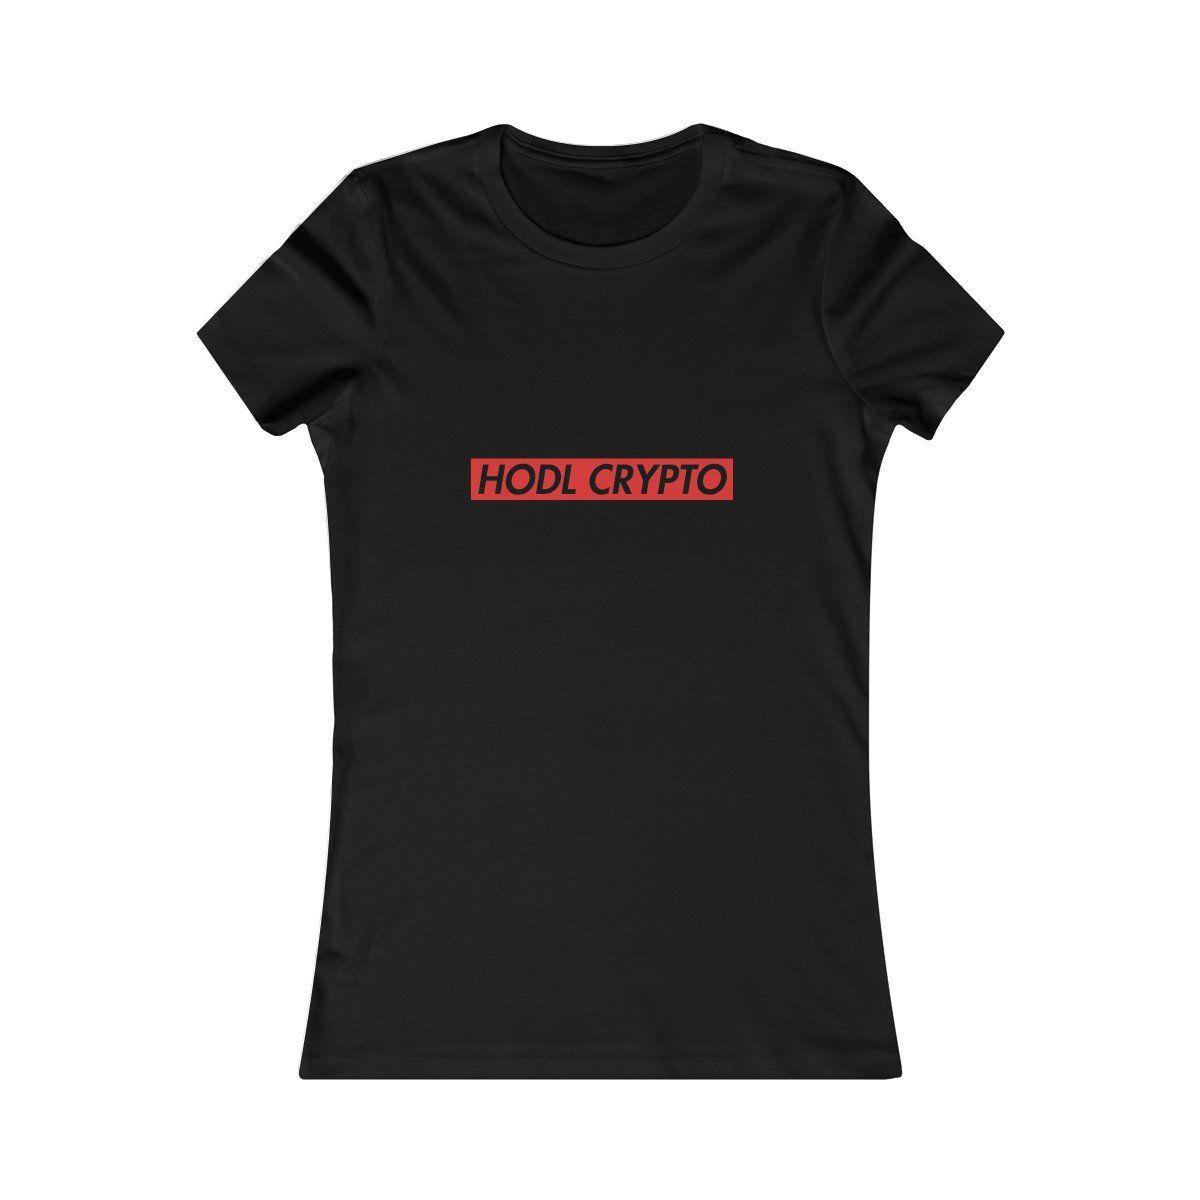 Cool Supreme Logo - Hodl crypto Women's T shirt in cool supreme crypto logo